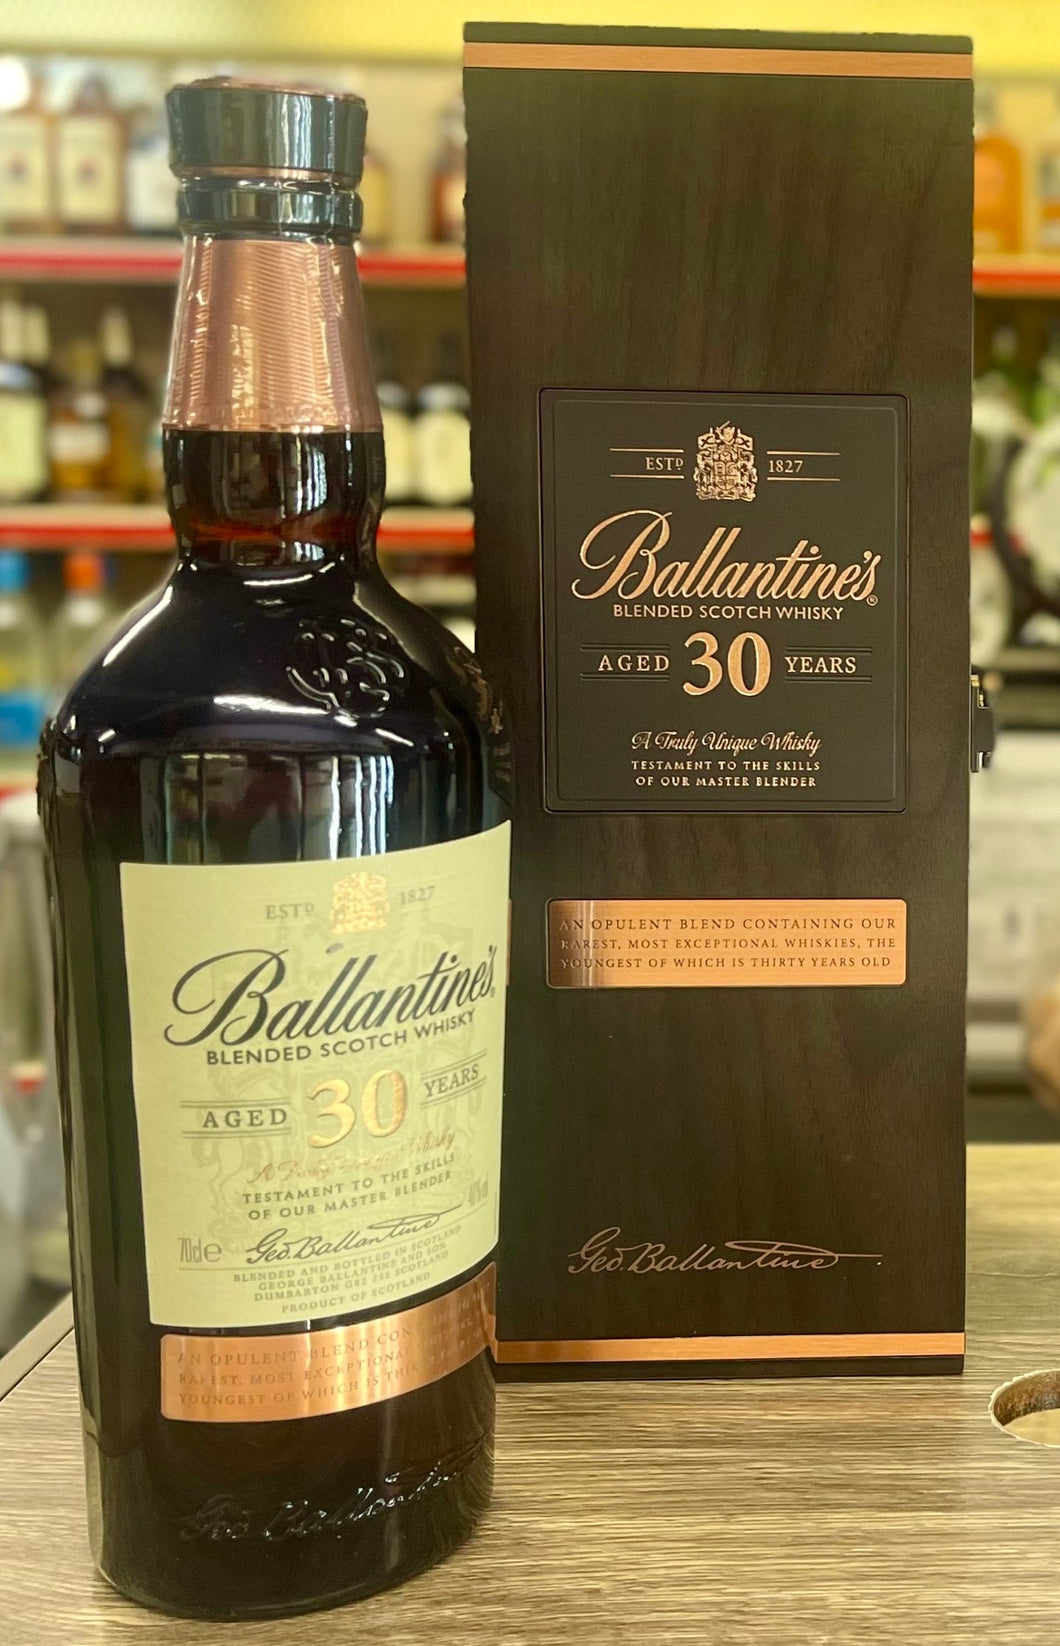 Ballantine's Very Old Scotch Whisky Aged 30 Years Limited Edition